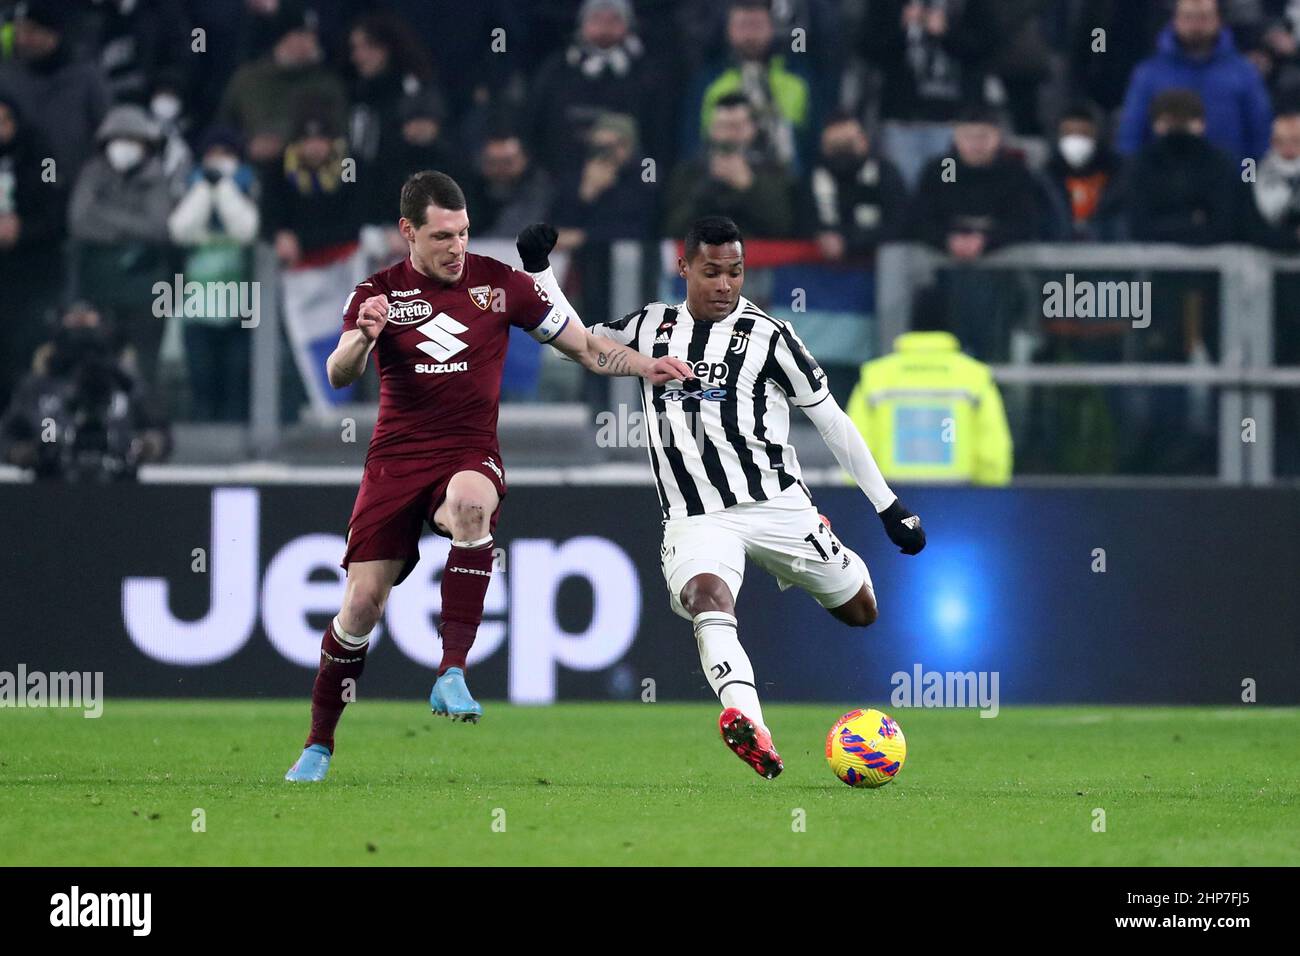 Torino, Italy. 18th Feb, 2022. Alex Sandro of Juventus Fc and Andrea Belotti of Torino Fc battle for the ball during the Serie A match between Juventus Fc and Torino Fc at Allianz Stadium on February 18, 2022 in Turin, Italy. Credit: Marco Canoniero/Alamy Live News Stock Photo